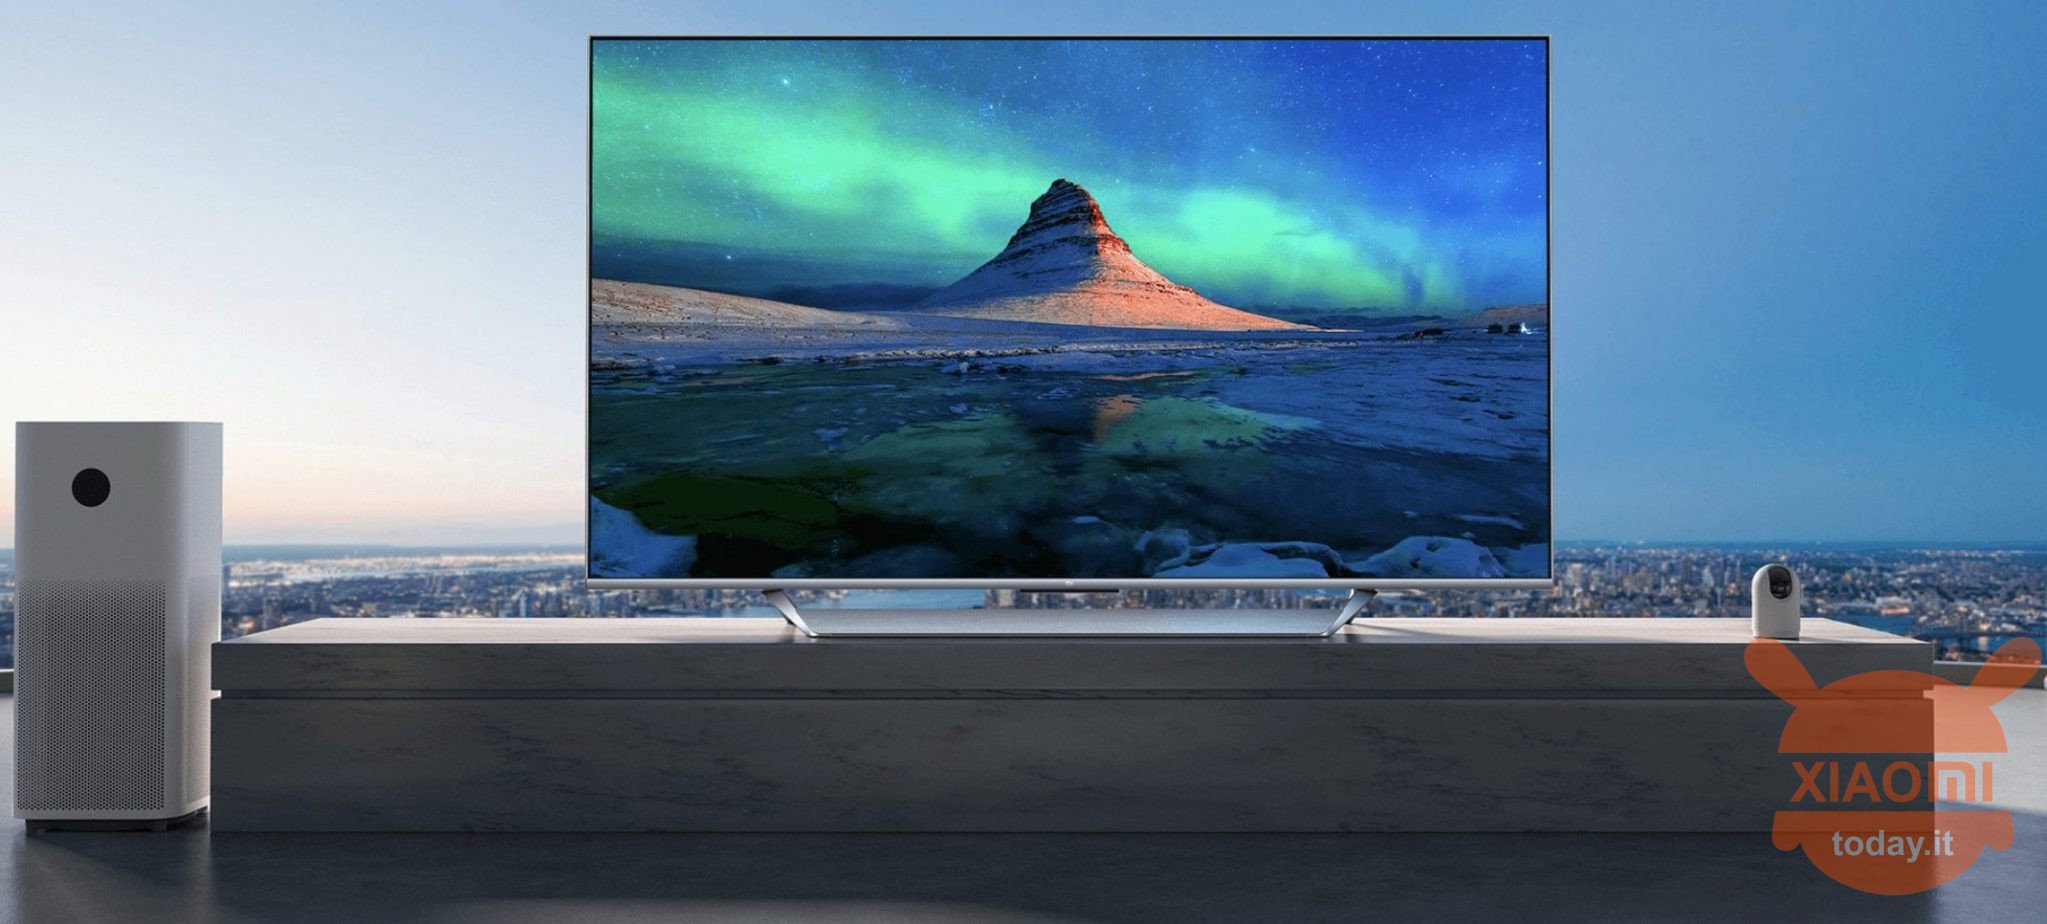 xiaomi mi tv q1 75 "does not natively support 4k with 120Hz